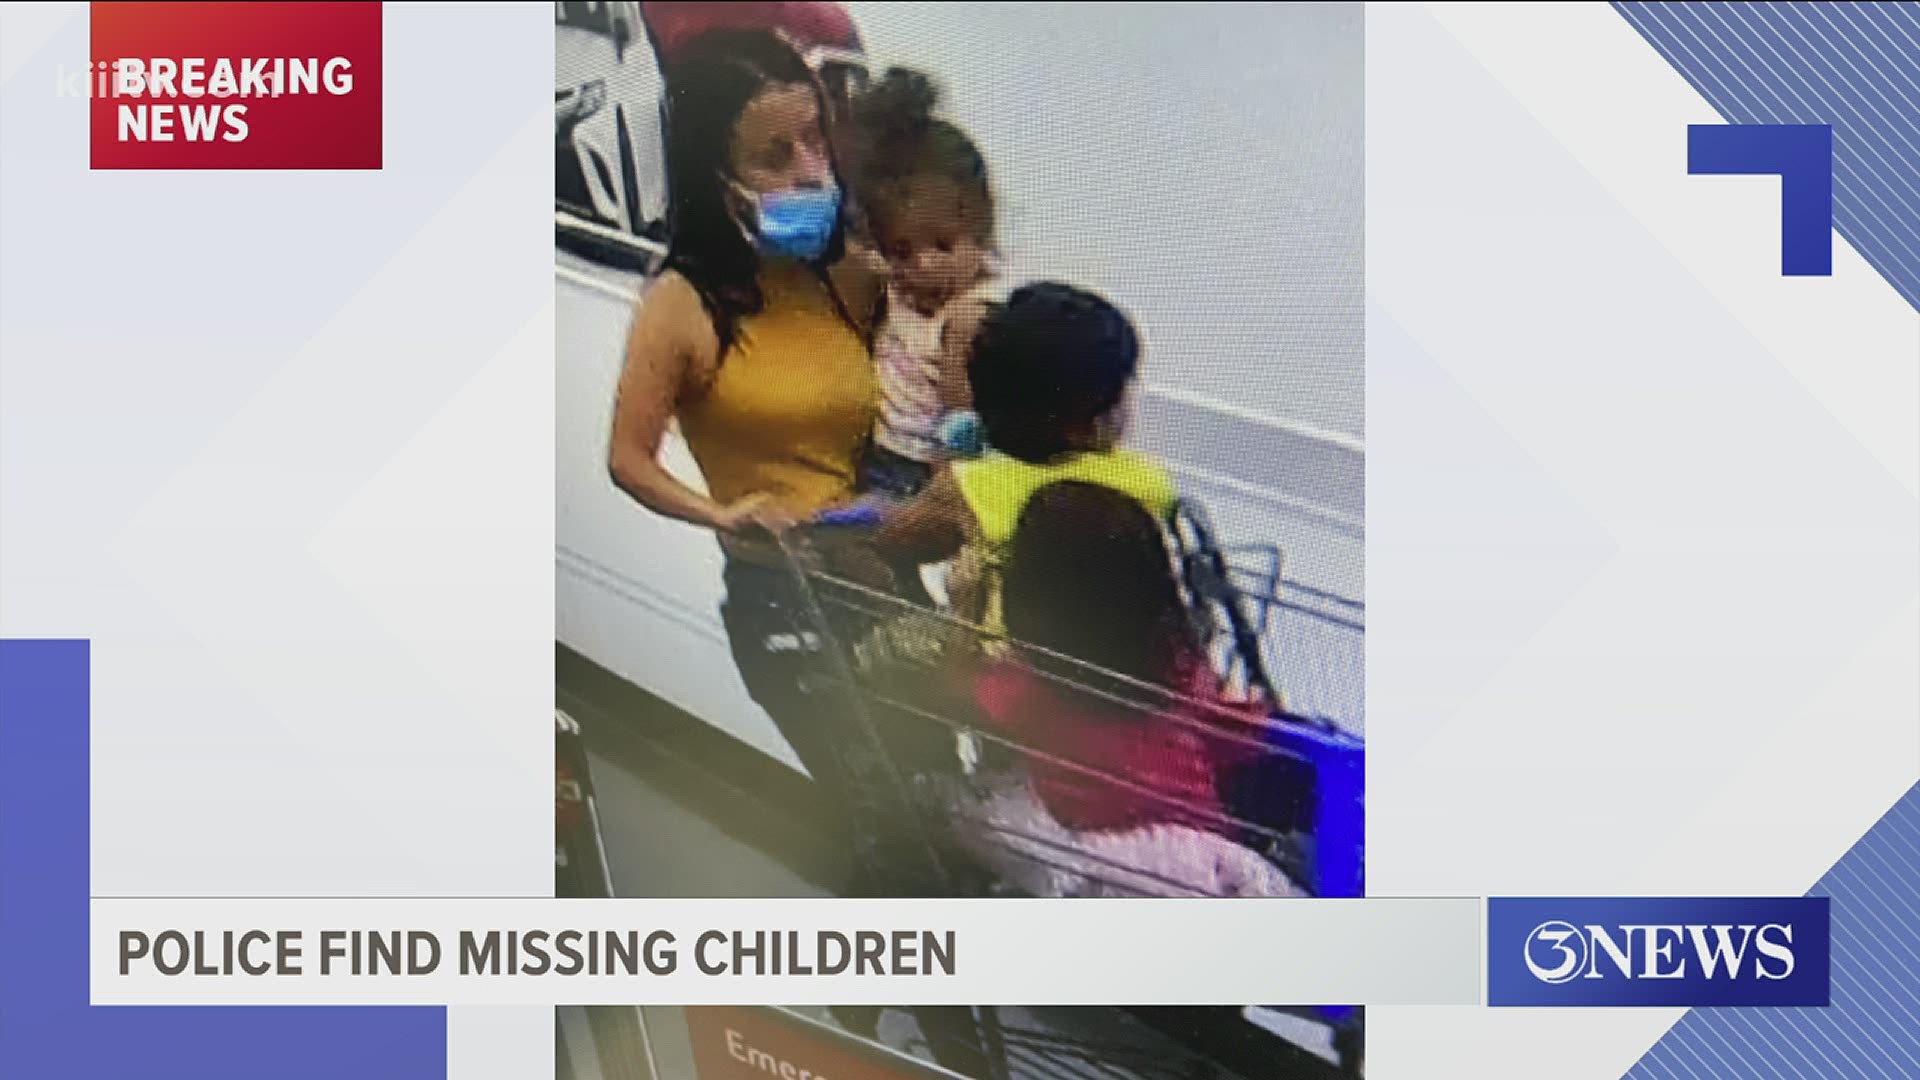 Police say the three children are safe and are in the process of being reunited with their Mother.